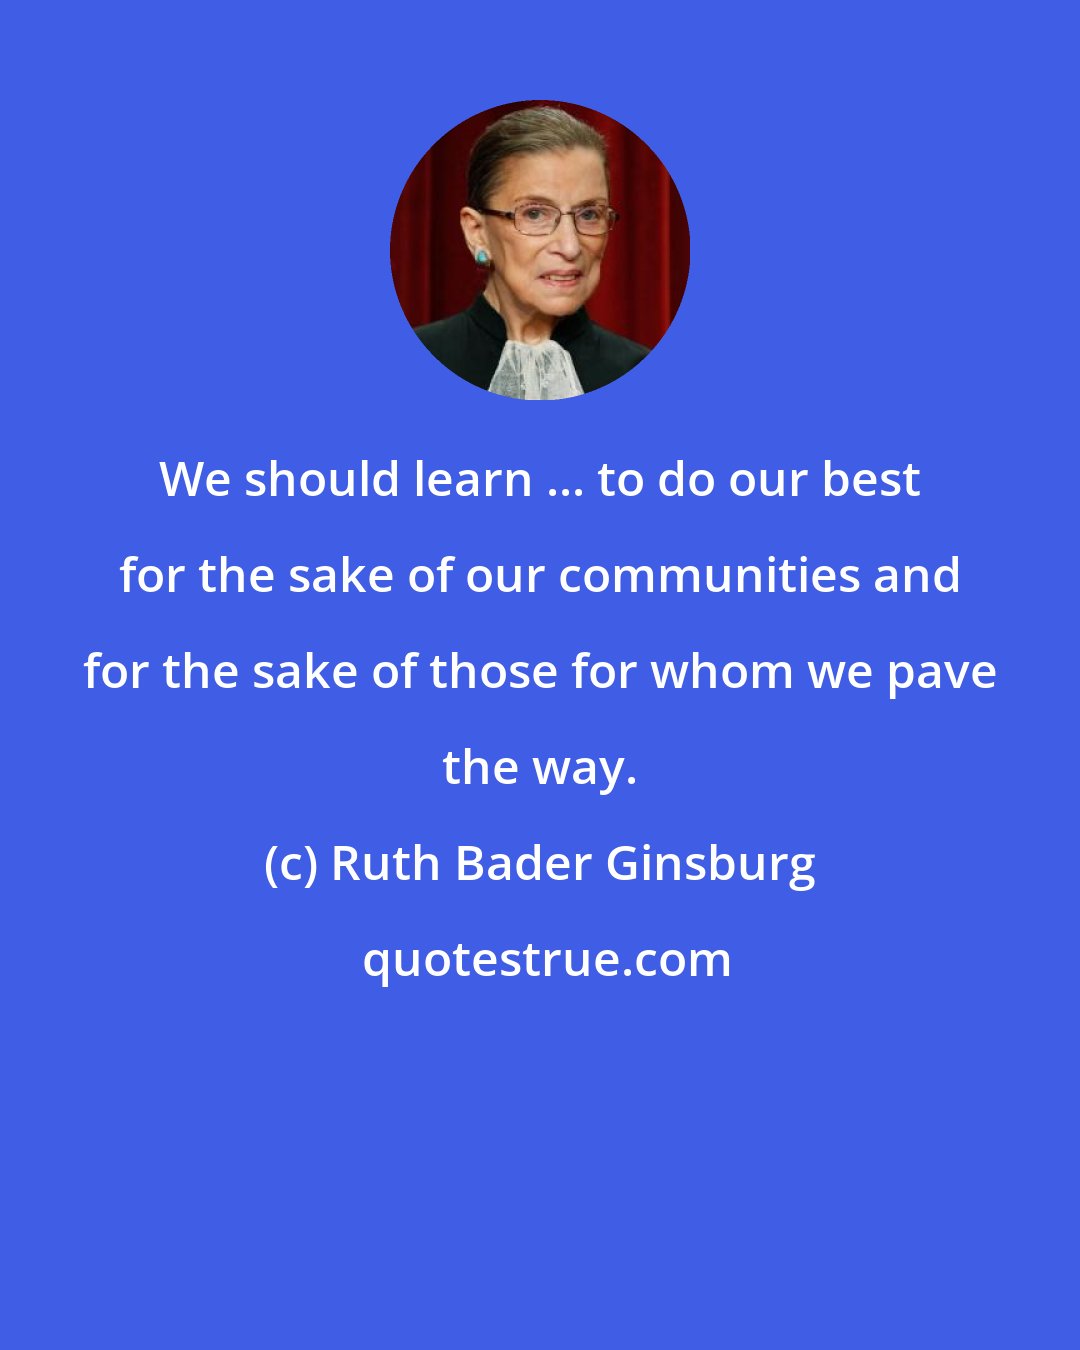 Ruth Bader Ginsburg: We should learn ... to do our best for the sake of our communities and for the sake of those for whom we pave the way.